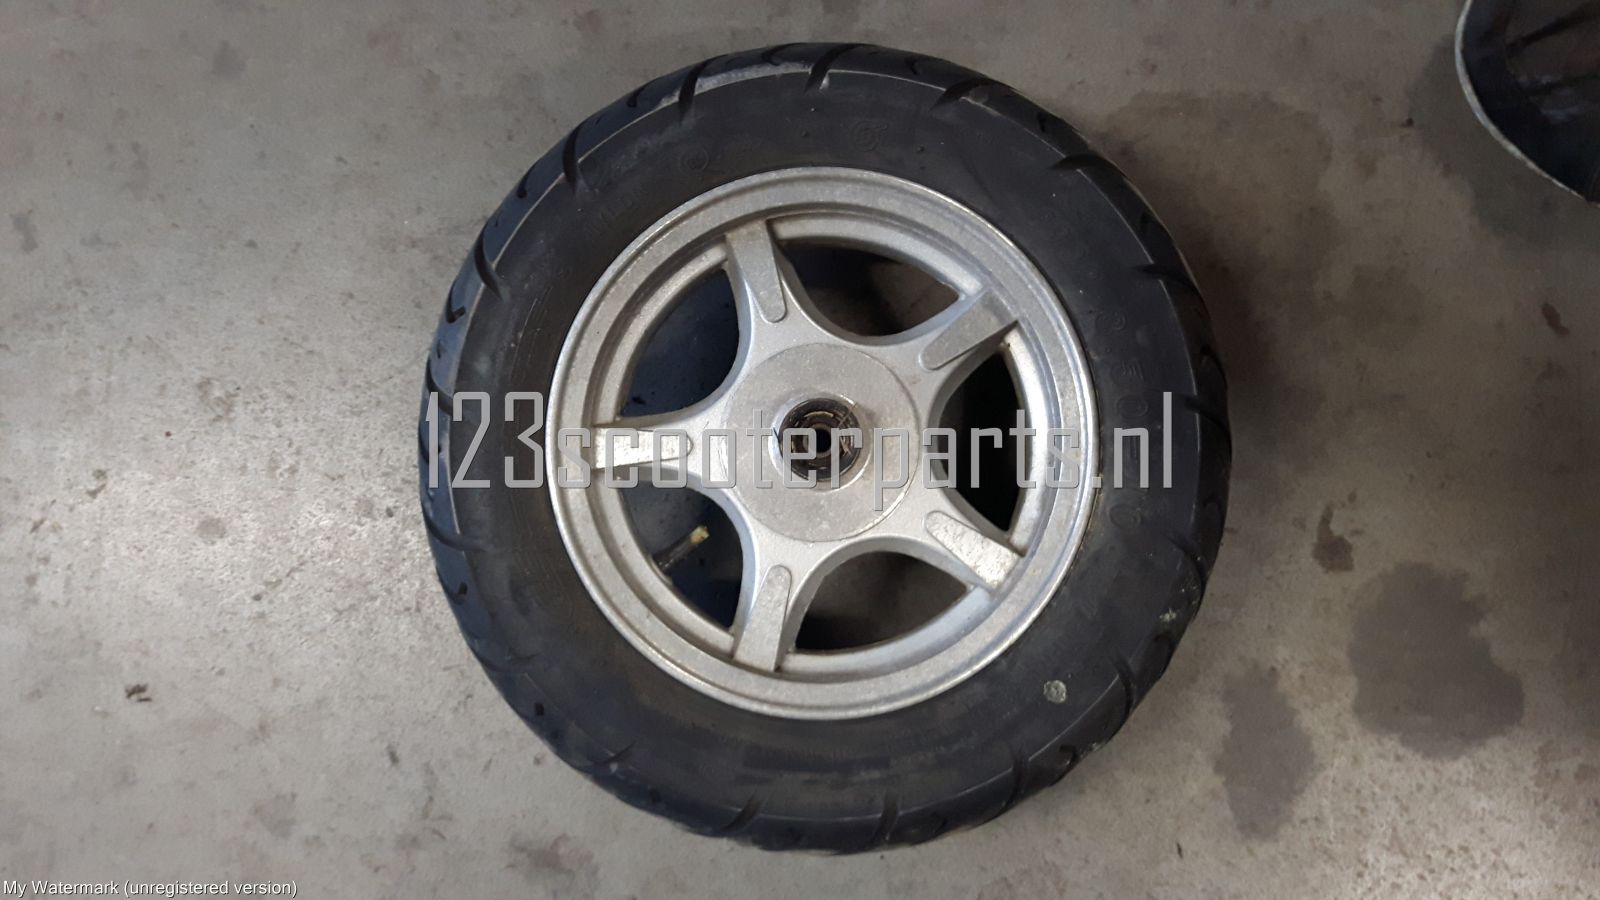 Benzhou YY50QT-26  rear wheel and tire